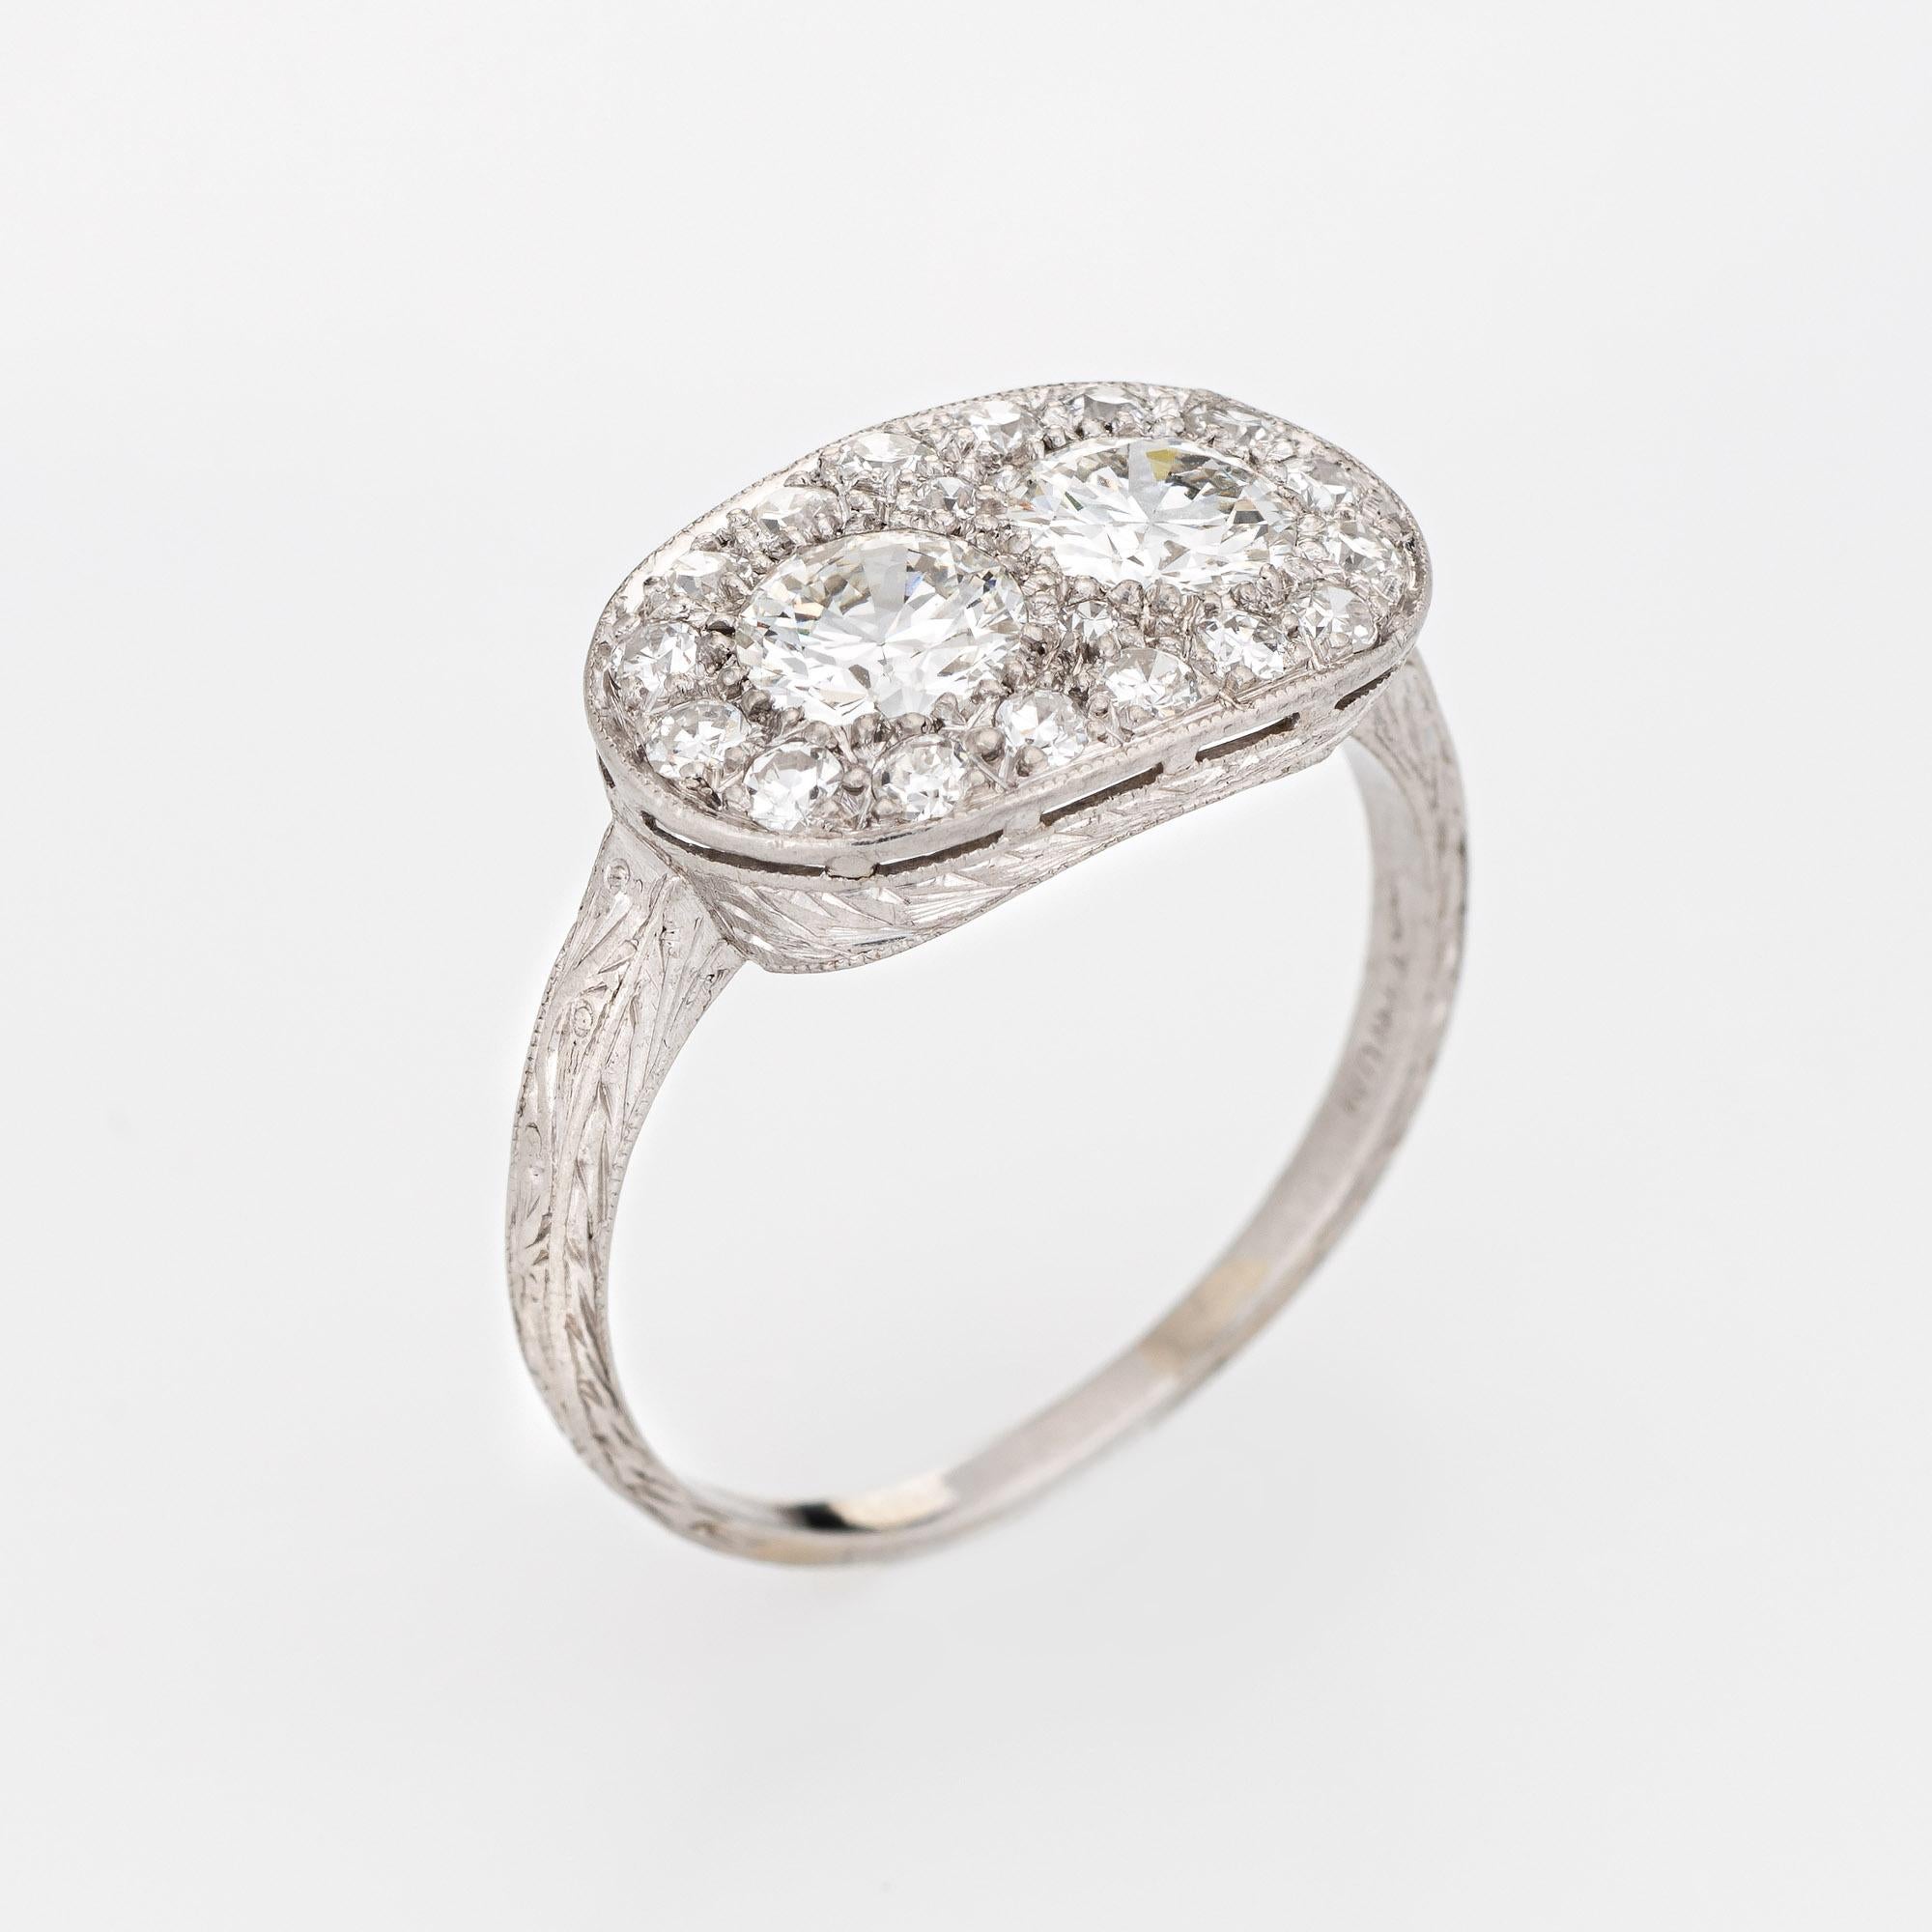 Finely detailed vintage Art Deco era diamond ring (circa 1920s to 1930s) crafted in 900 platinum. 

Two centrally mounted Old European diamonds are estimated at 0.60 carats each, accented with a further 16 single cut diamonds. The total diamond